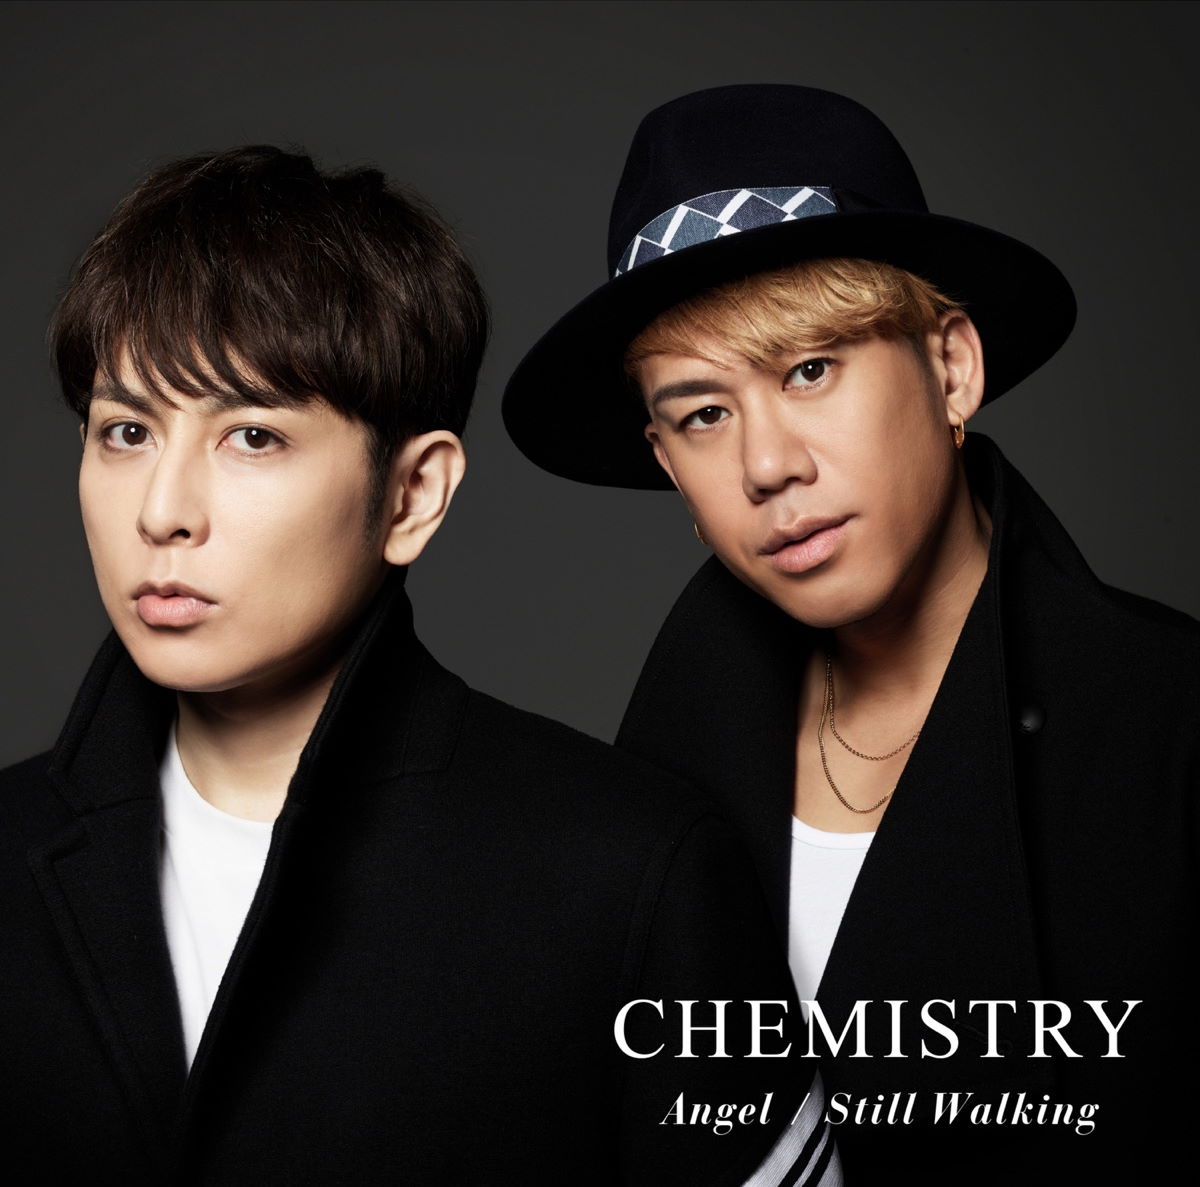 Cover for『CHEMISTRY - Still Walking』from the release『Angel / Still Walking』